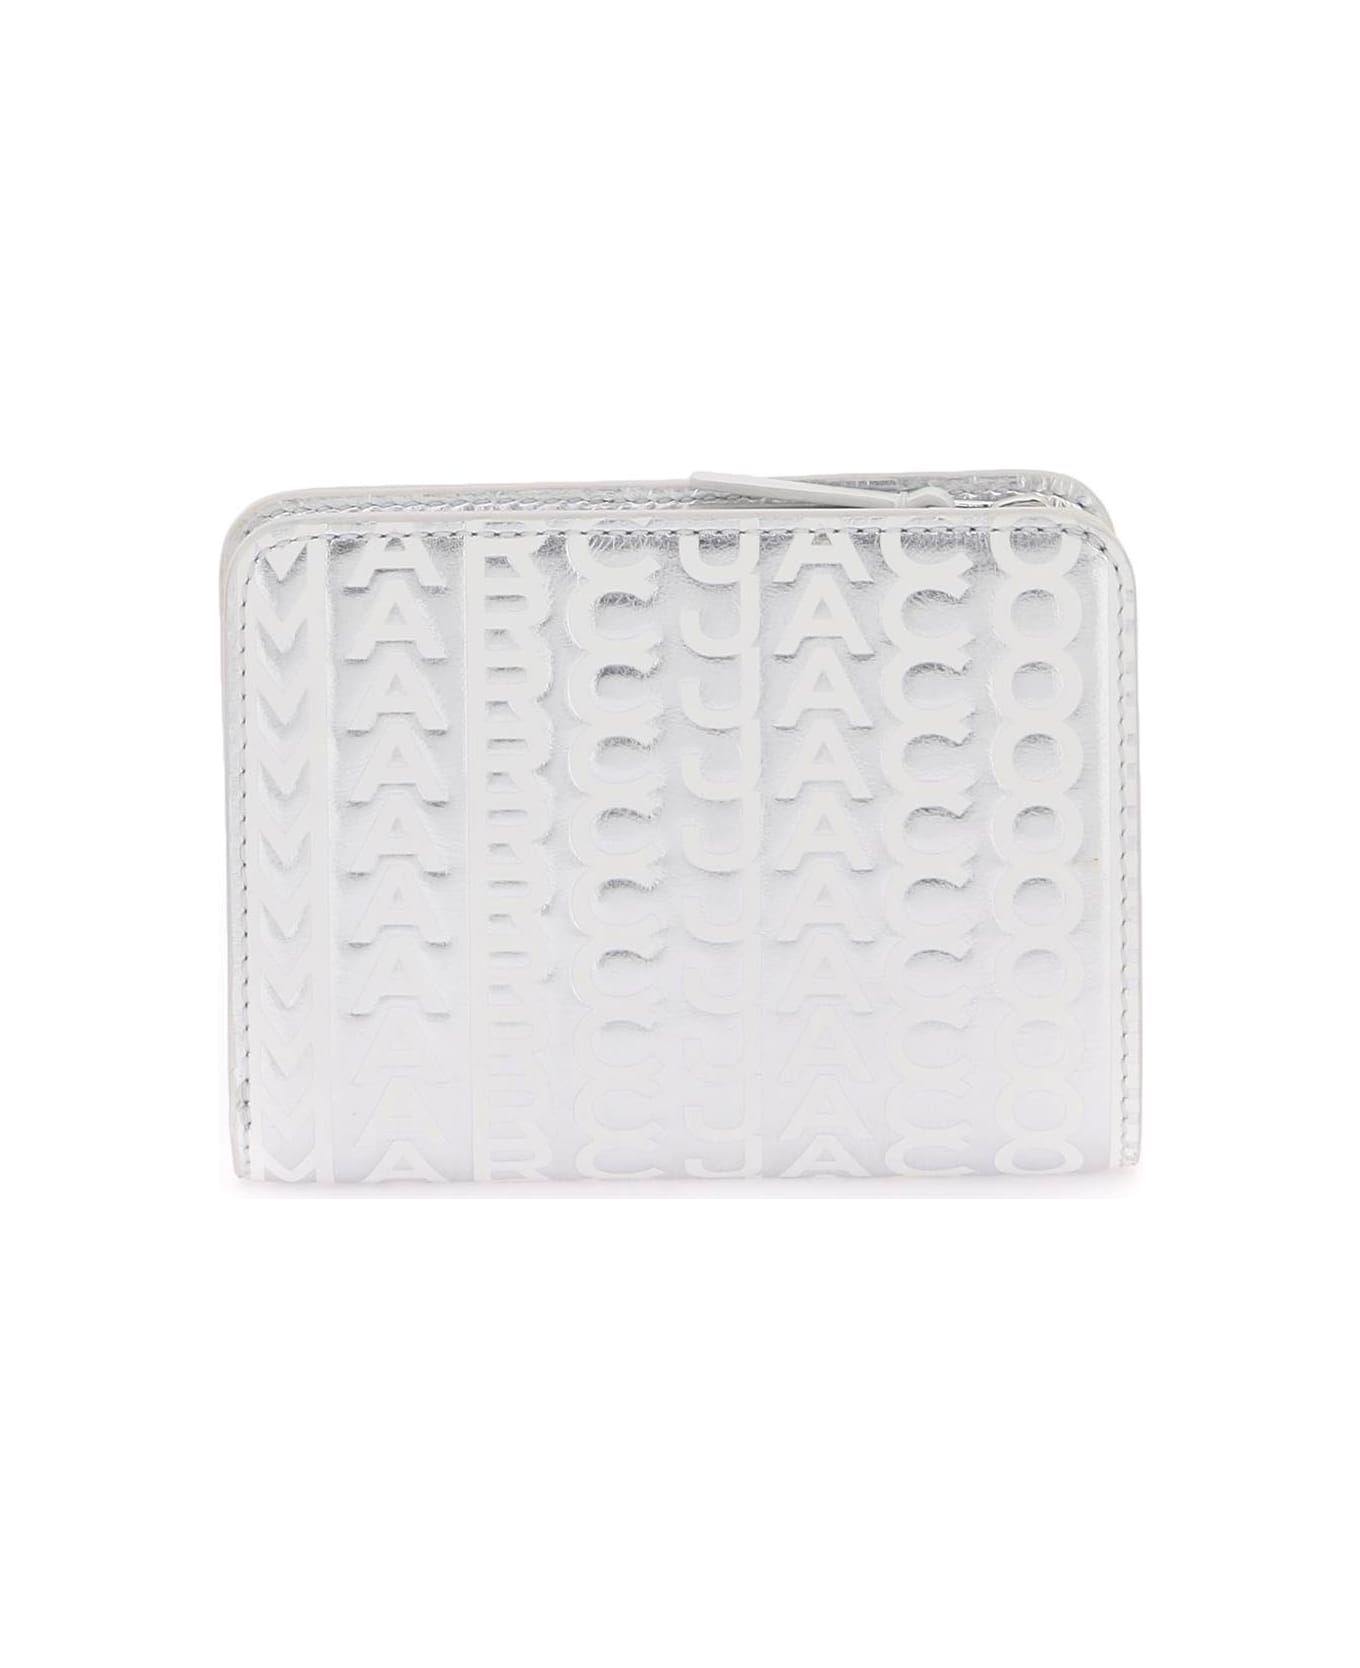 Marc Jacobs Compact Wallet - SILVER BRIGHT WHITE